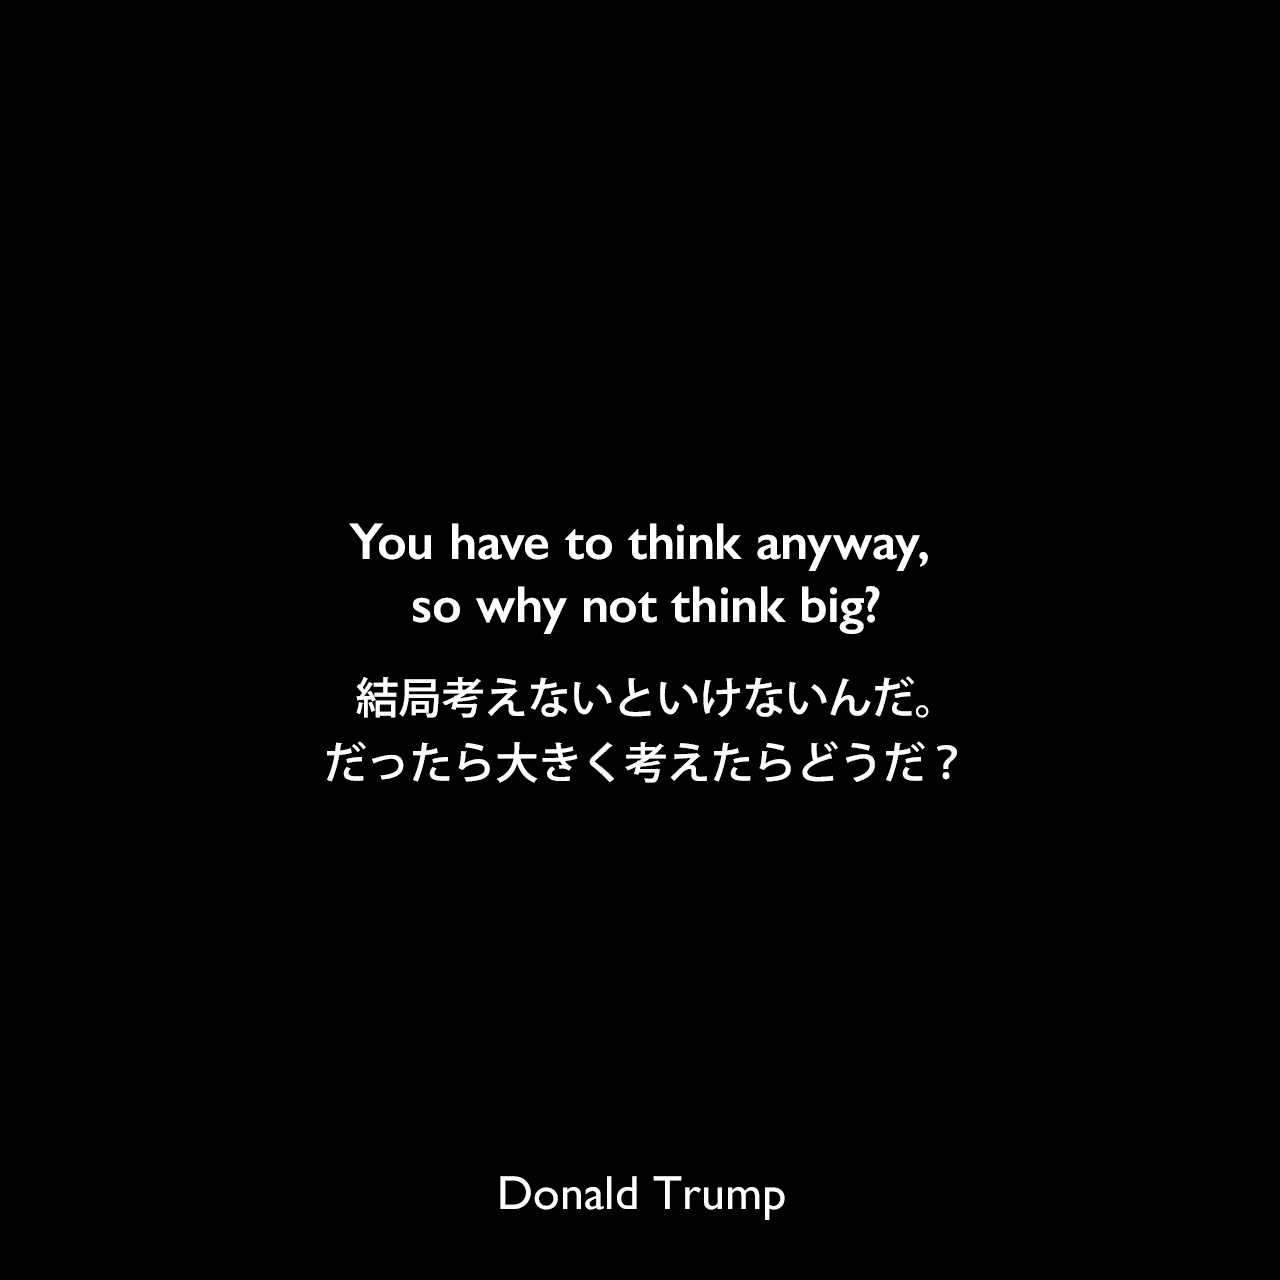 You have to think anyway, so why not think big?結局考えないといけないんだ。だったら大きく考えたらどうだ？